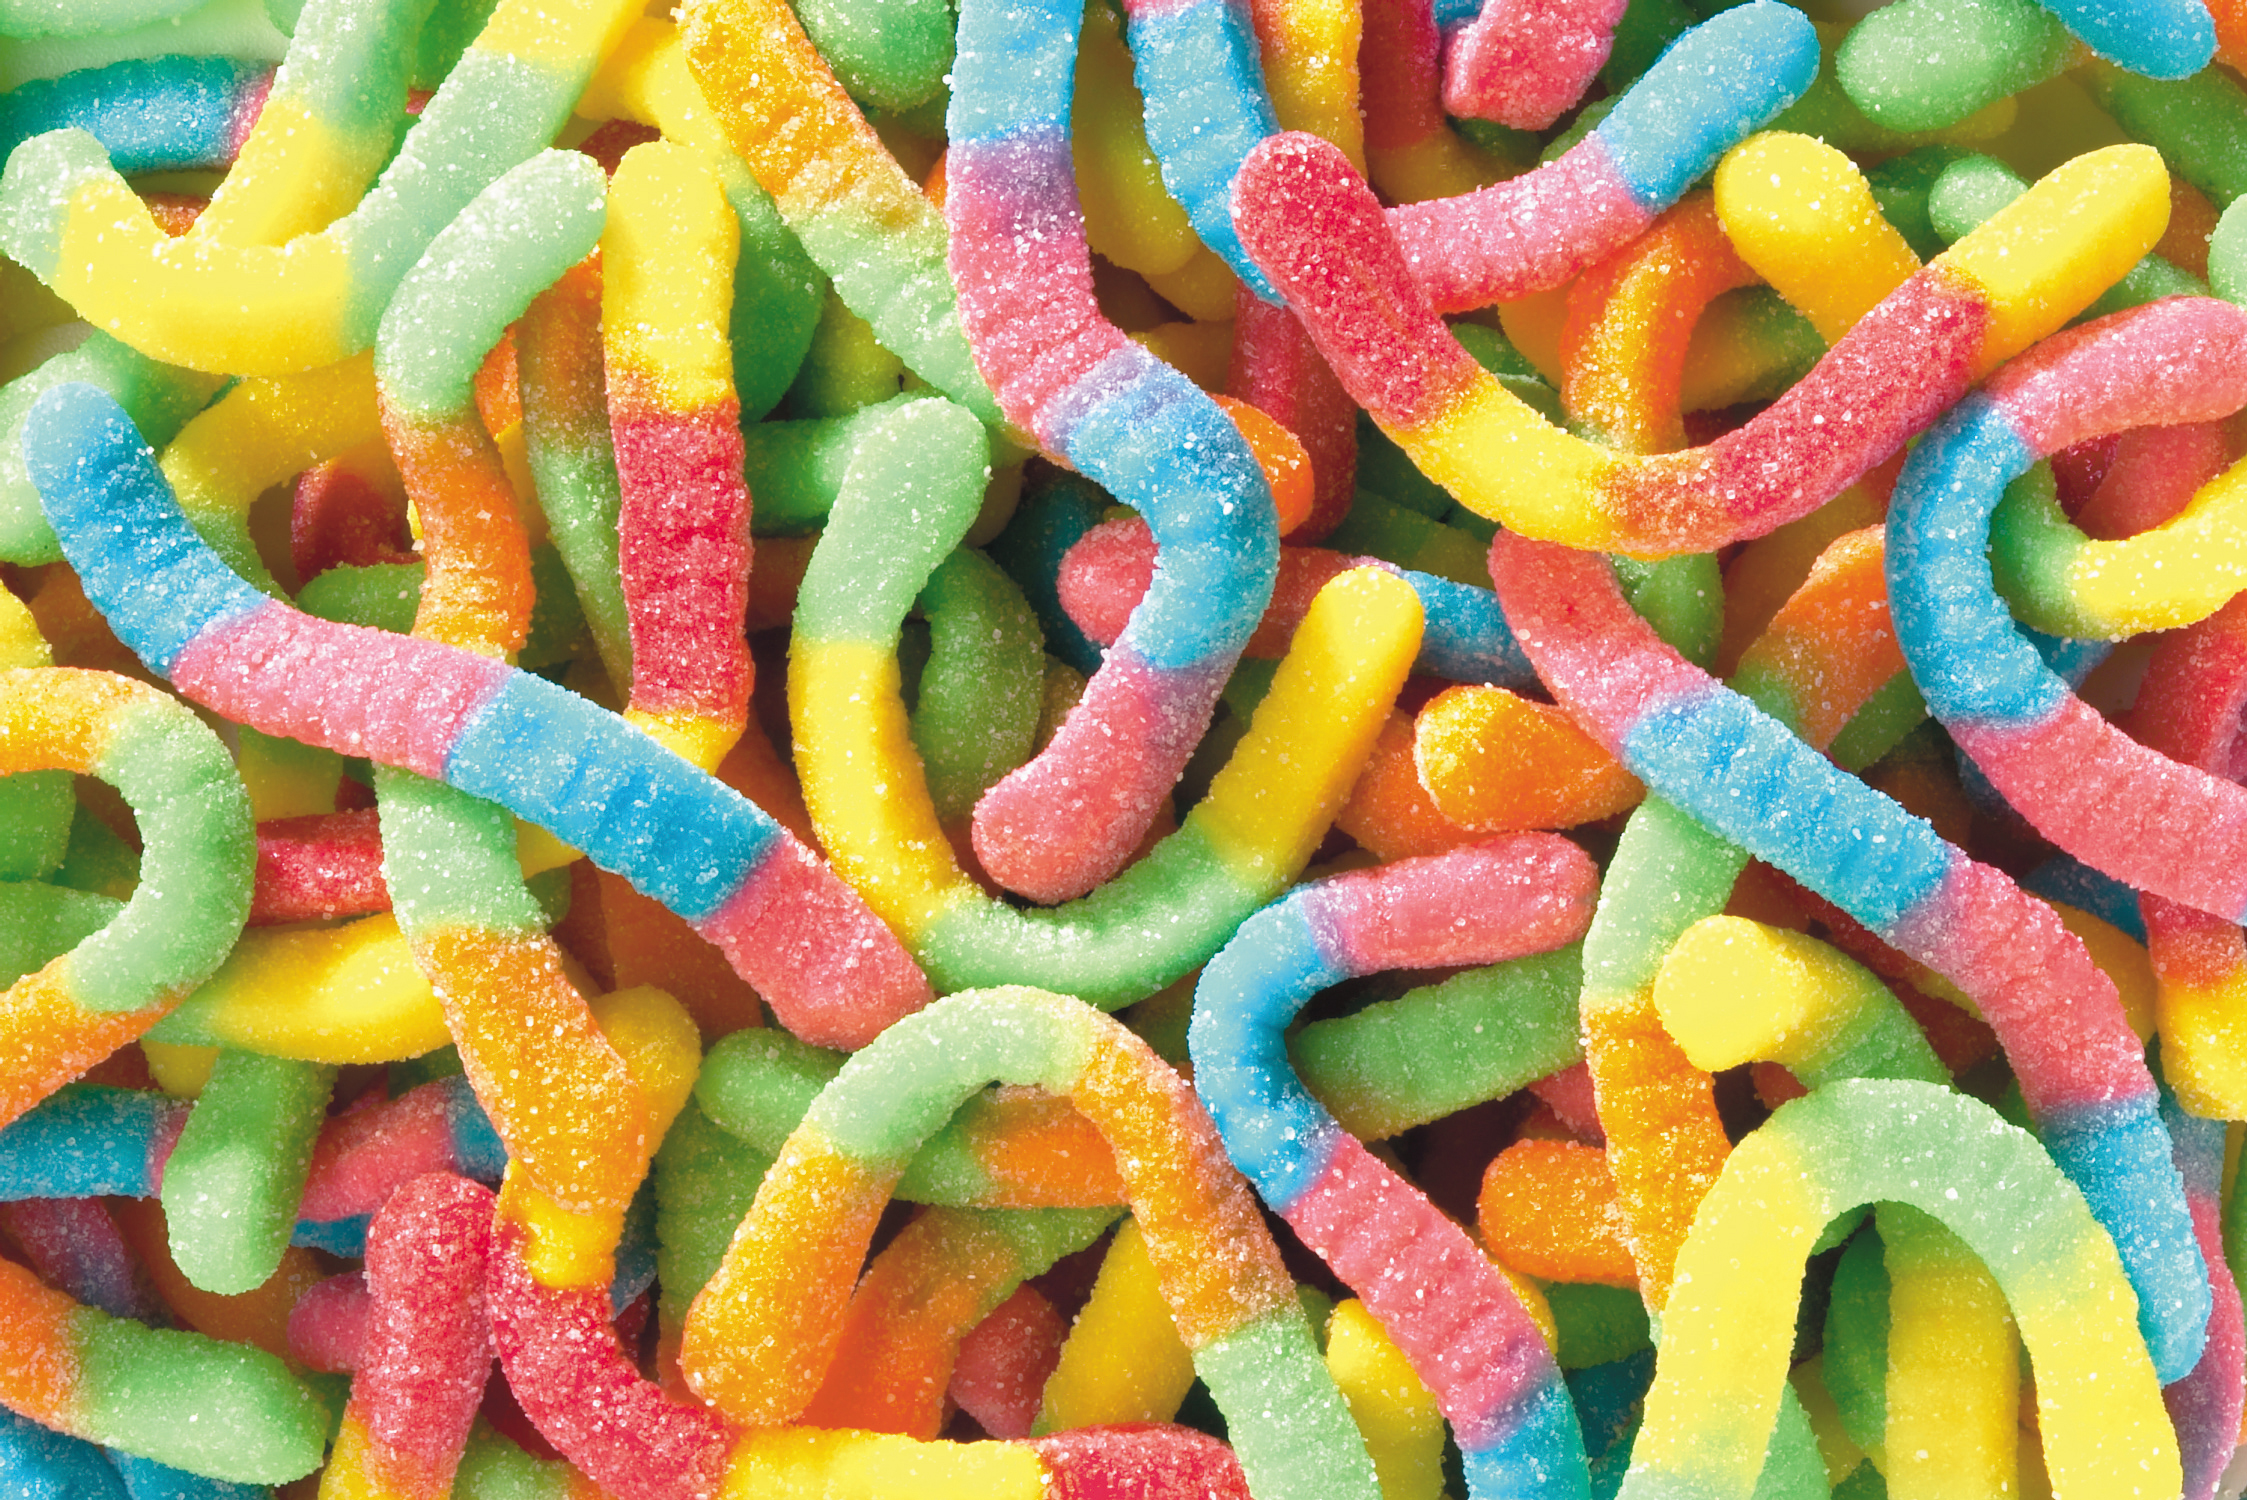 Neon Sour Gummi Worms - American Fundraising Group